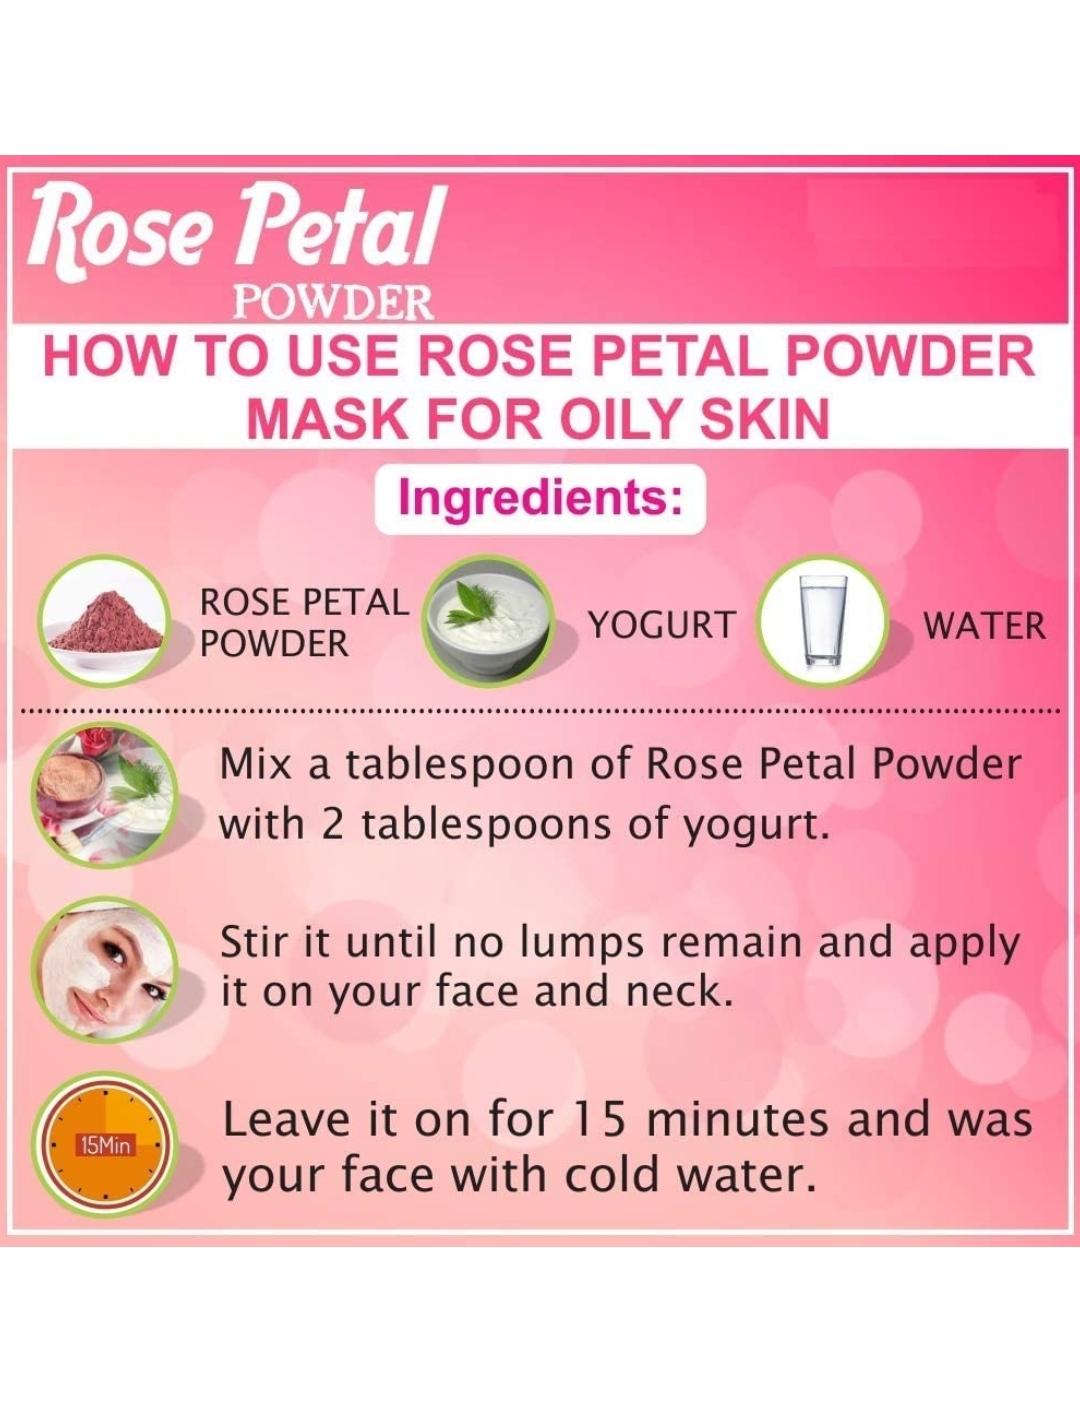 SK ORGANIC Rose petal powder For Face And Facial Skin (non treated and no chemicals)